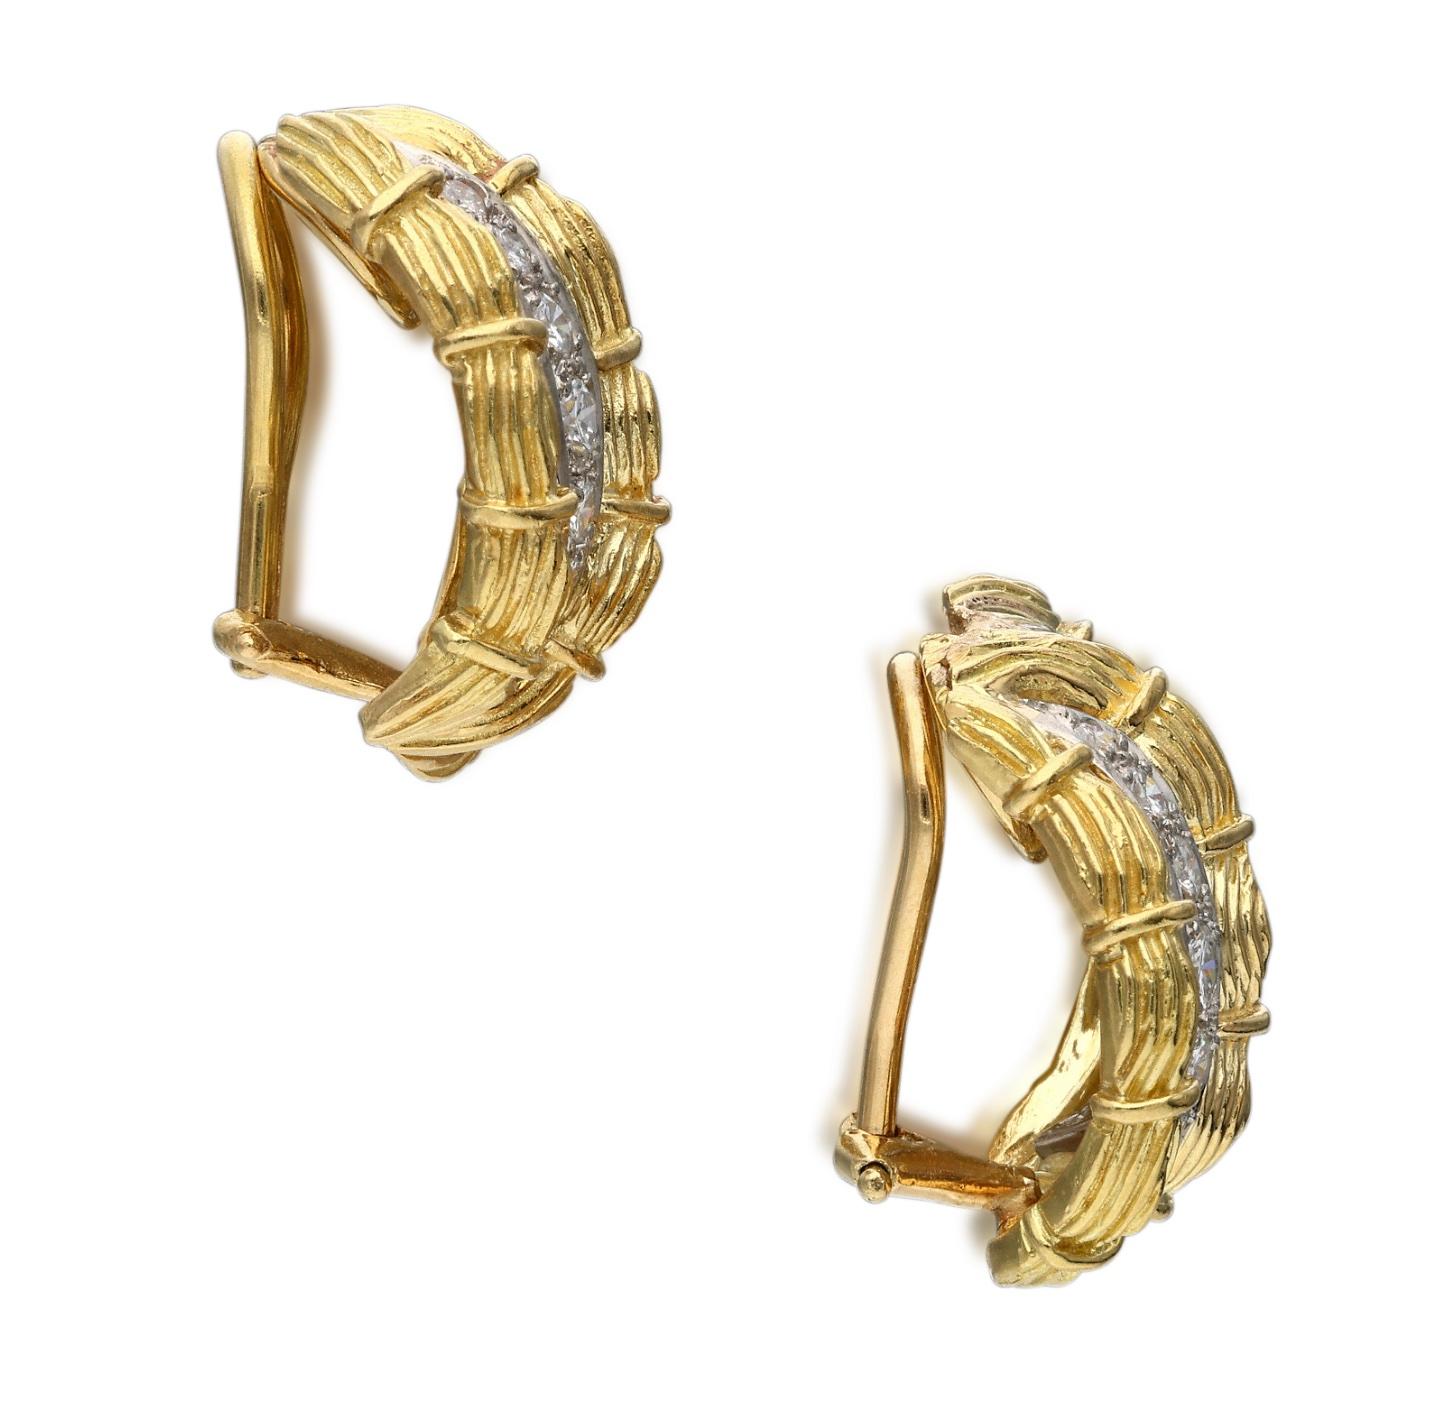 Each clip is composed of two rows of round brilliant cut diamonds, set between three rows of textured gold.
- Diamonds weigh a total of approximately 1.10 carats
- 18 karat yellow gold
- The total weight is 17 grams
- The length is ¾ inch

The